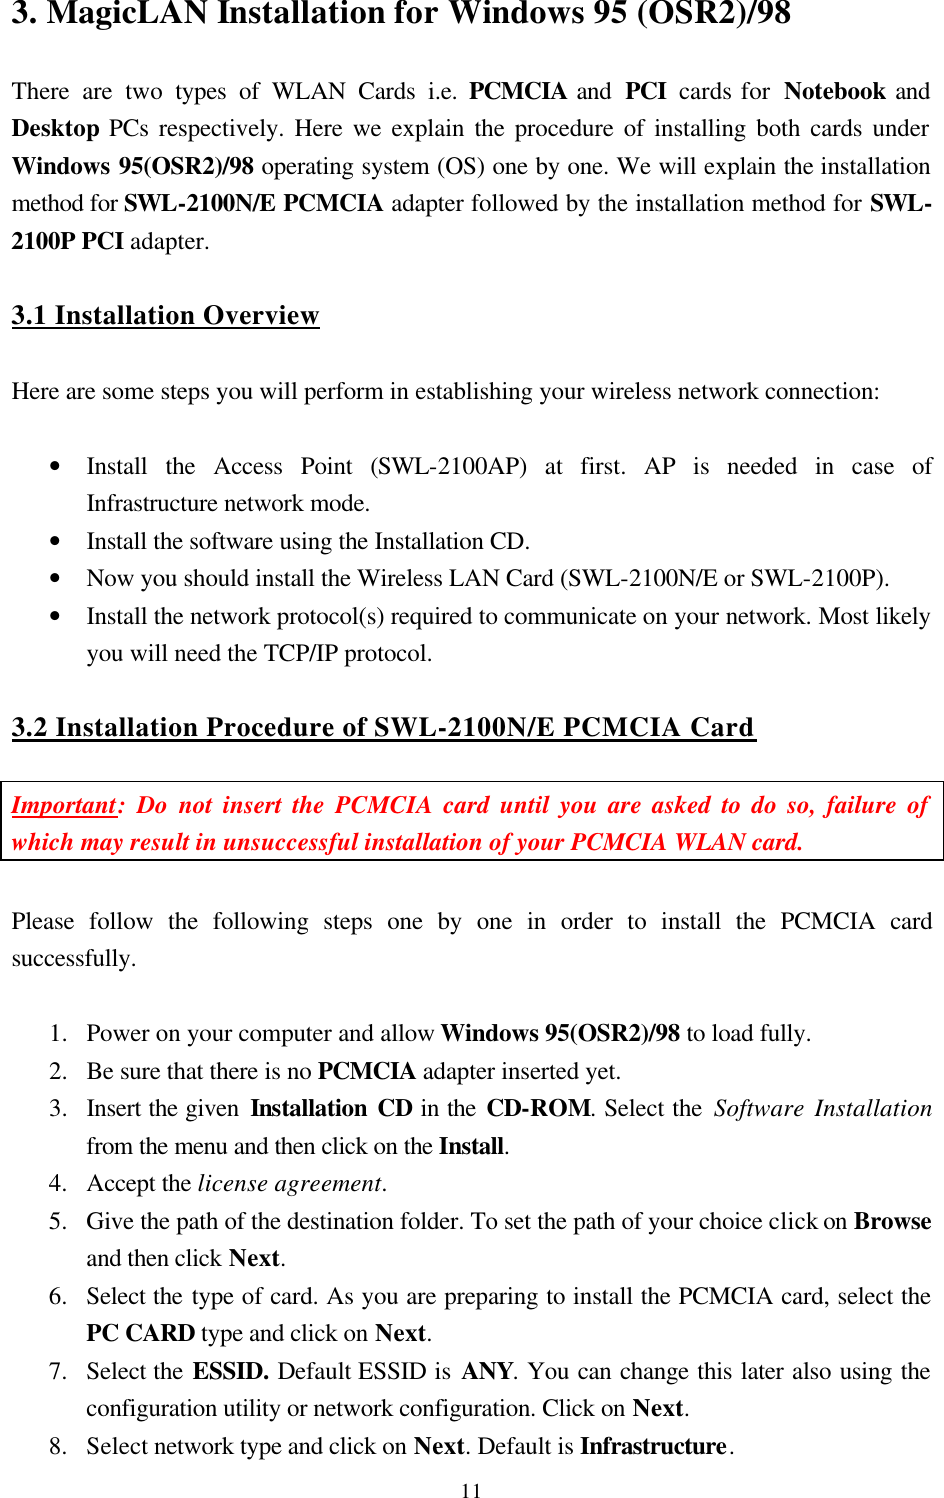  113. MagicLAN Installation for Windows 95 (OSR2)/98  There are two types of WLAN Cards i.e. PCMCIA and  PCI  cards for  Notebook and Desktop PCs respectively. Here we explain the procedure of installing both cards under Windows 95(OSR2)/98 operating system (OS) one by one. We will explain the installation method for SWL-2100N/E PCMCIA adapter followed by the installation method for SWL-2100P PCI adapter.  3.1 Installation Overview  Here are some steps you will perform in establishing your wireless network connection:  • Install the Access Point (SWL-2100AP) at first. AP is needed in case of Infrastructure network mode. • Install the software using the Installation CD. • Now you should install the Wireless LAN Card (SWL-2100N/E or SWL-2100P).  • Install the network protocol(s) required to communicate on your network. Most likely you will need the TCP/IP protocol.  3.2 Installation Procedure of SWL-2100N/E PCMCIA Card  Important: Do not insert the PCMCIA card until you are asked to do so, failure of which may result in unsuccessful installation of your PCMCIA WLAN card.  Please follow the following steps one by one in order to install the PCMCIA card successfully.  1.  Power on your computer and allow Windows 95(OSR2)/98 to load fully. 2.  Be sure that there is no PCMCIA adapter inserted yet. 3.  Insert the given Installation CD in the CD-ROM. Select the Software Installation from the menu and then click on the Install.  4.  Accept the license agreement. 5.  Give the path of the destination folder. To set the path of your choice click on Browse and then click Next. 6.  Select the type of card. As you are preparing to install the PCMCIA card, select the PC CARD type and click on Next. 7.  Select the ESSID. Default ESSID is ANY. You can change this later also using the configuration utility or network configuration. Click on Next. 8.  Select network type and click on Next. Default is Infrastructure. 